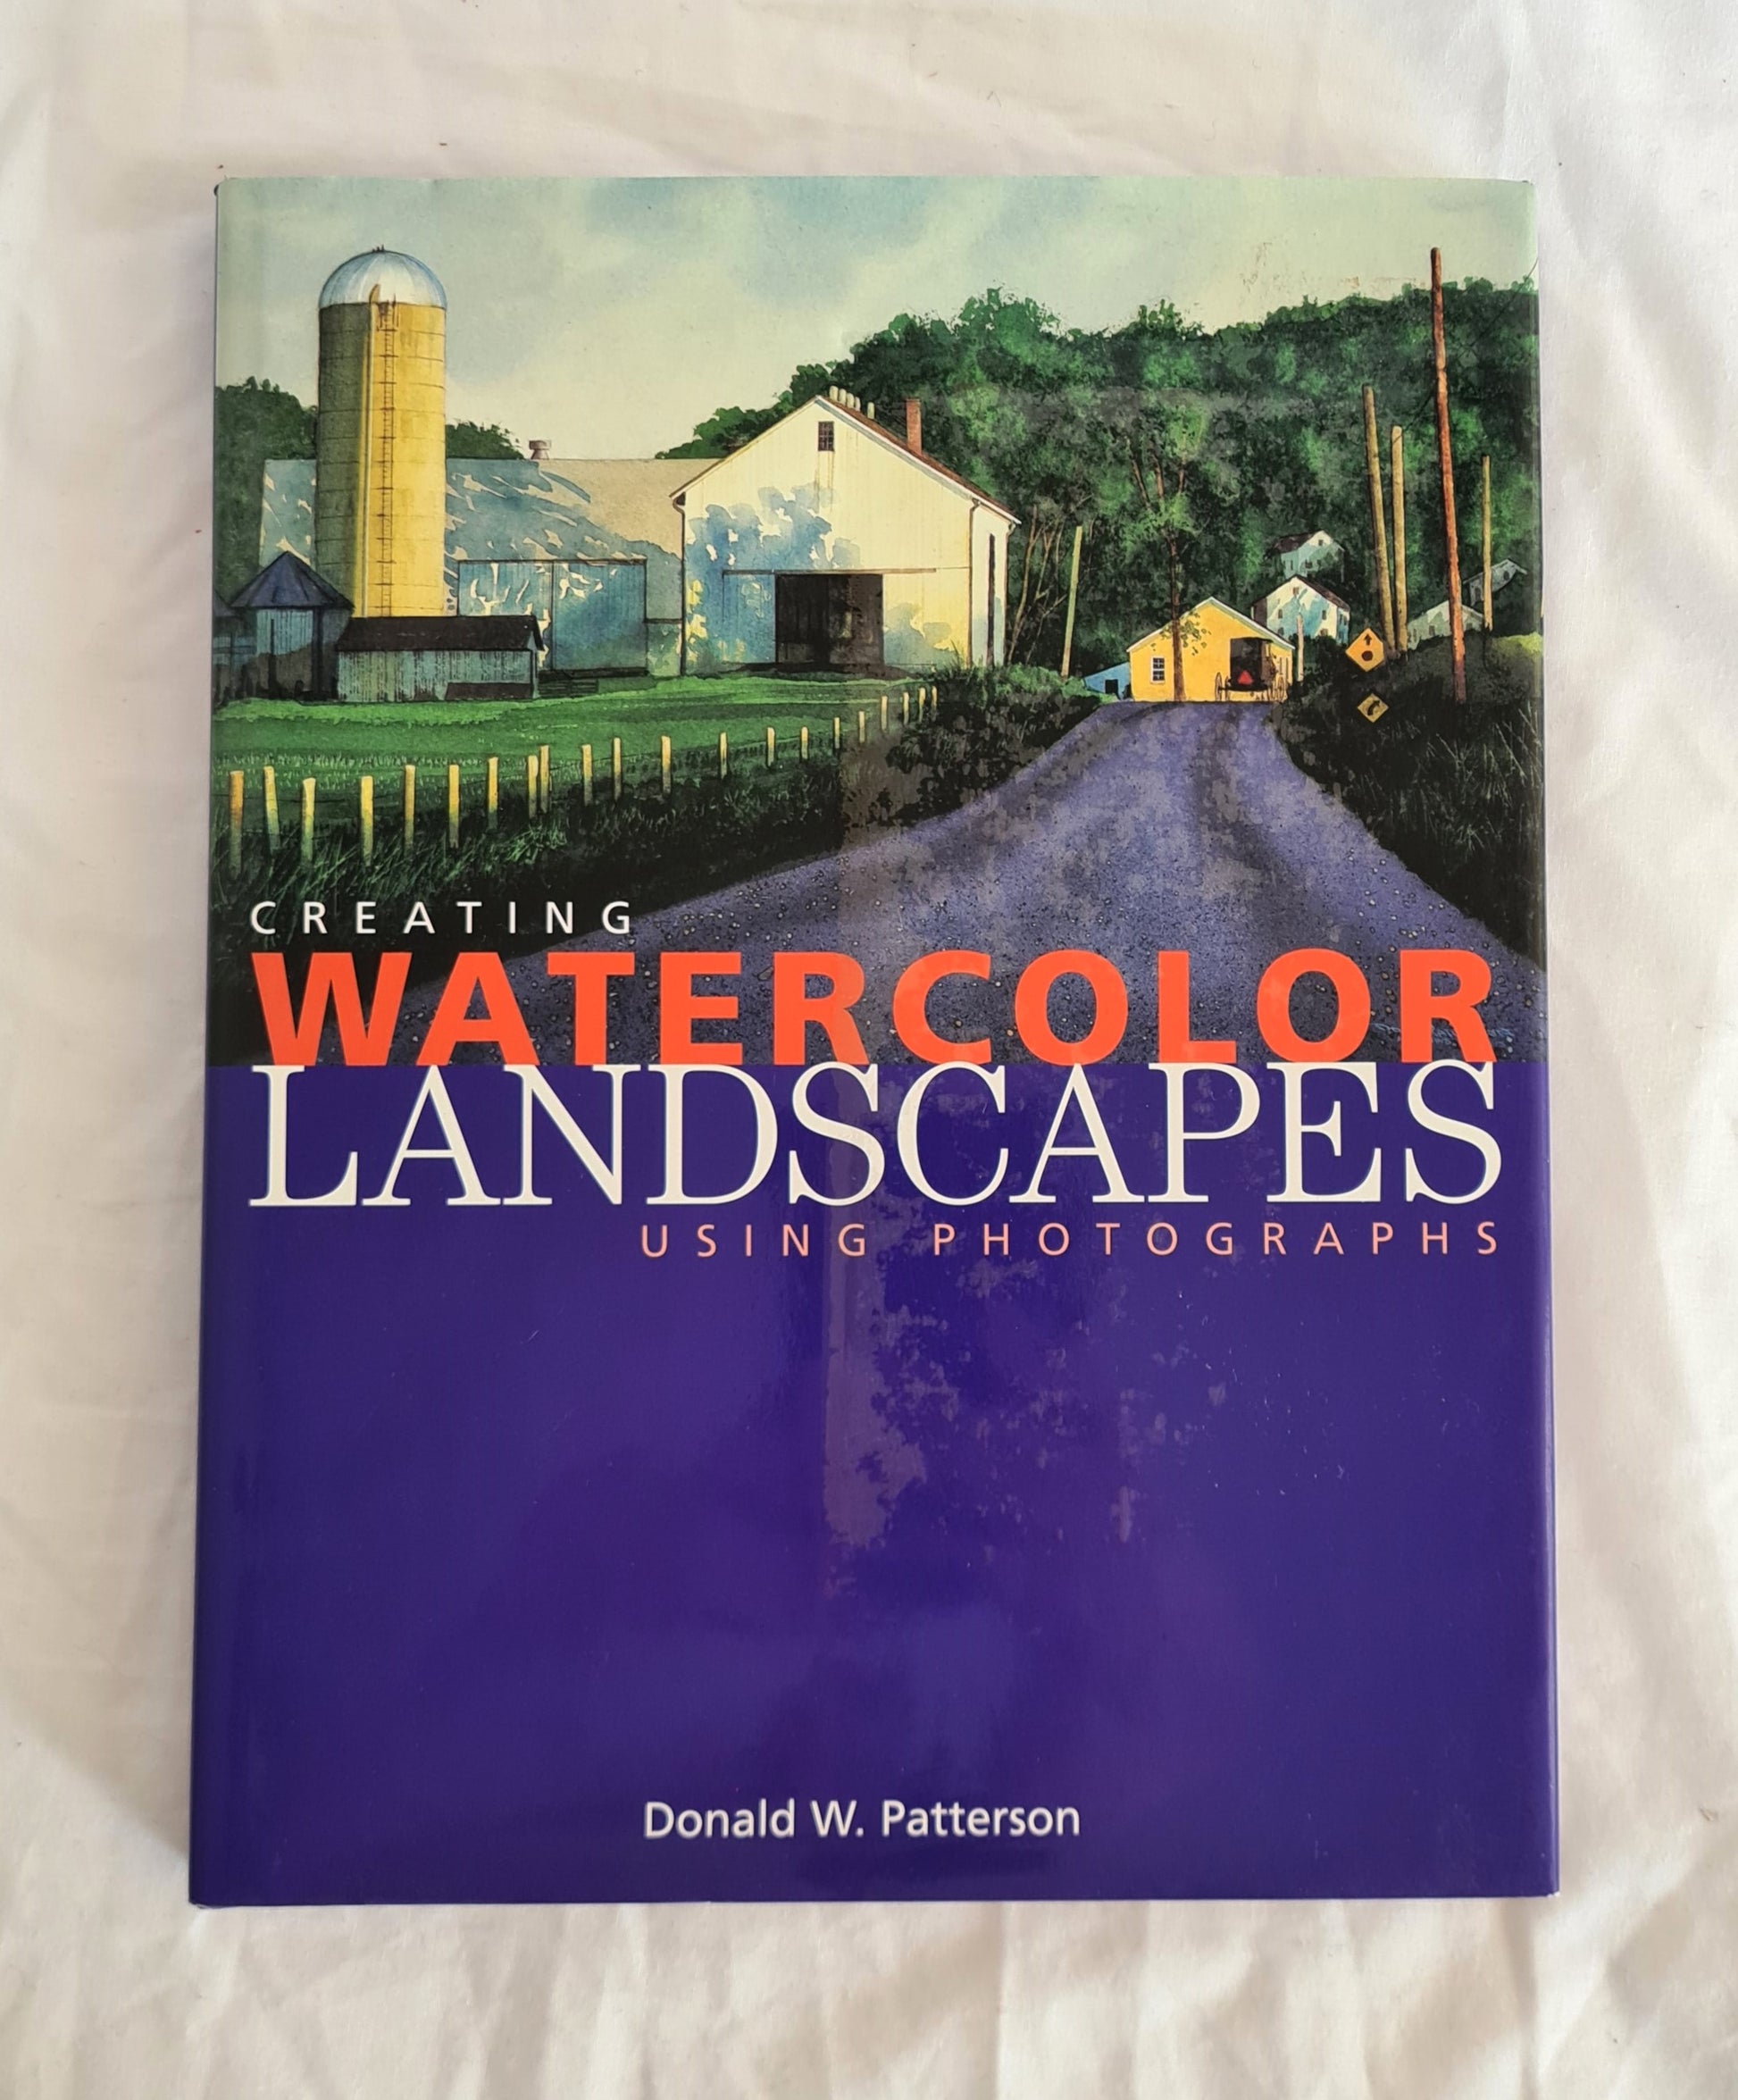 Creating Watercolor Landscapes Using Photographs  by Donald W. Patterson